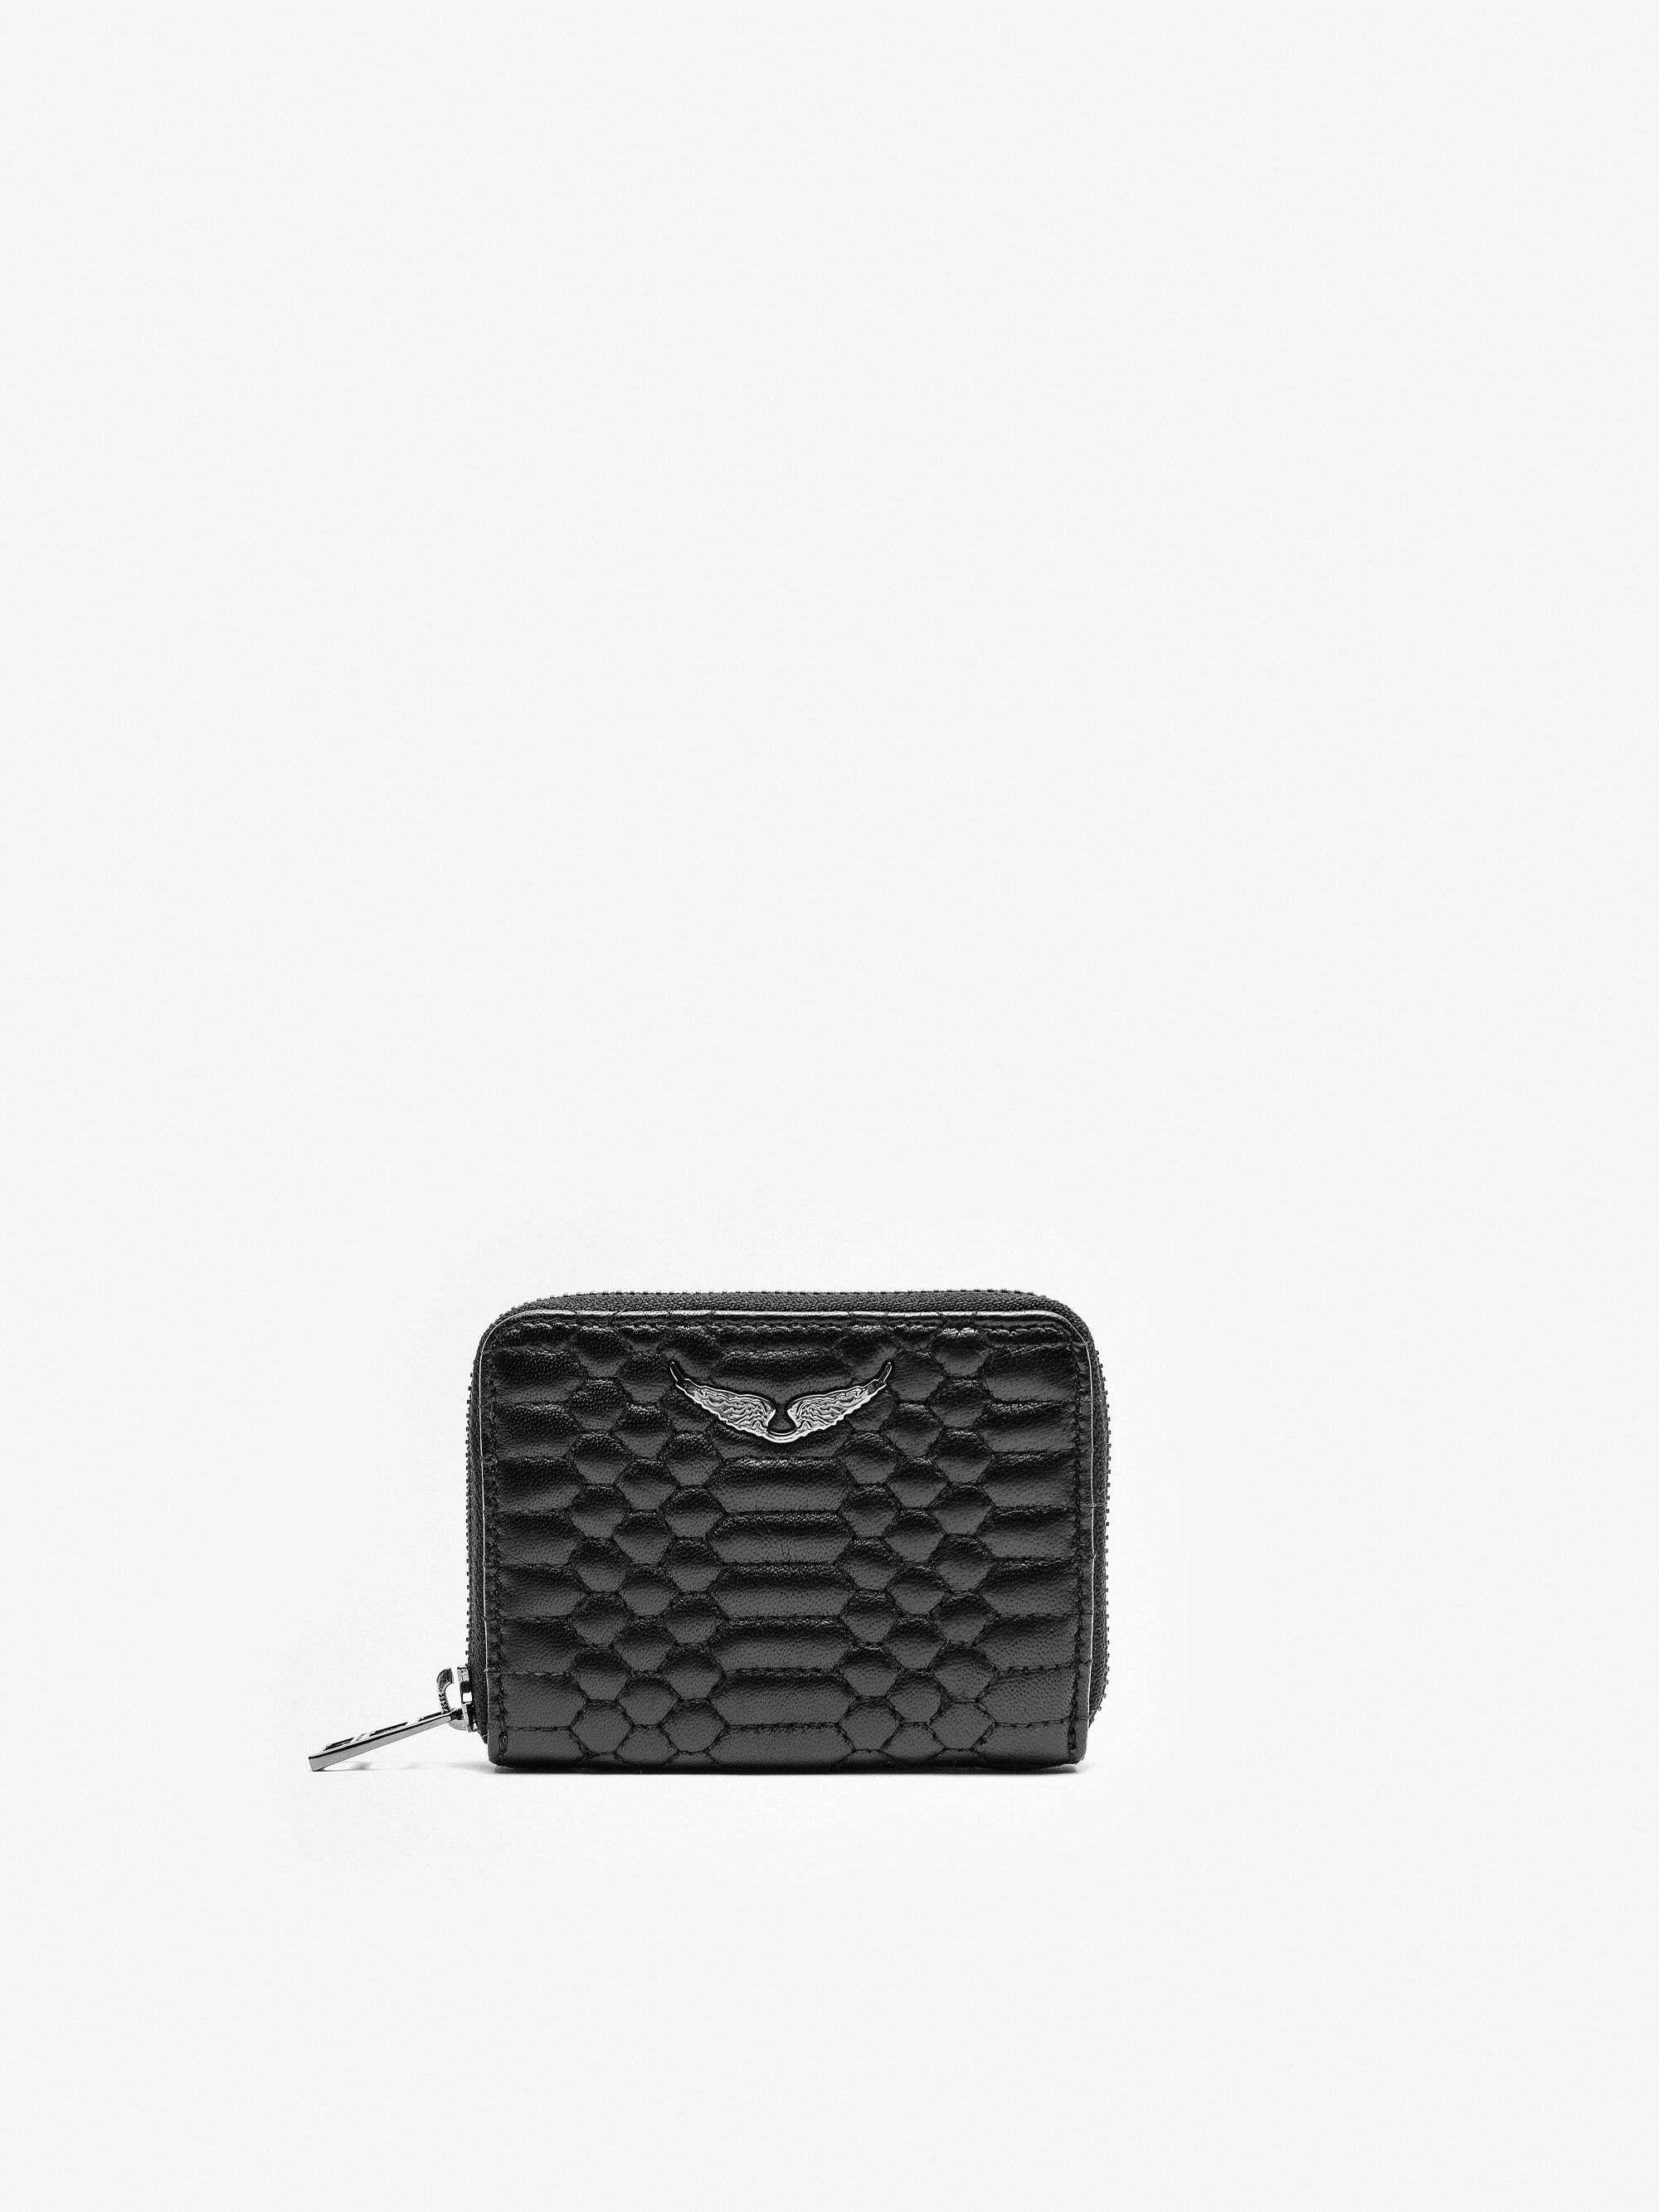 Mini ZV Matelasse Wallet - Women’s black quilted effect leather purse.